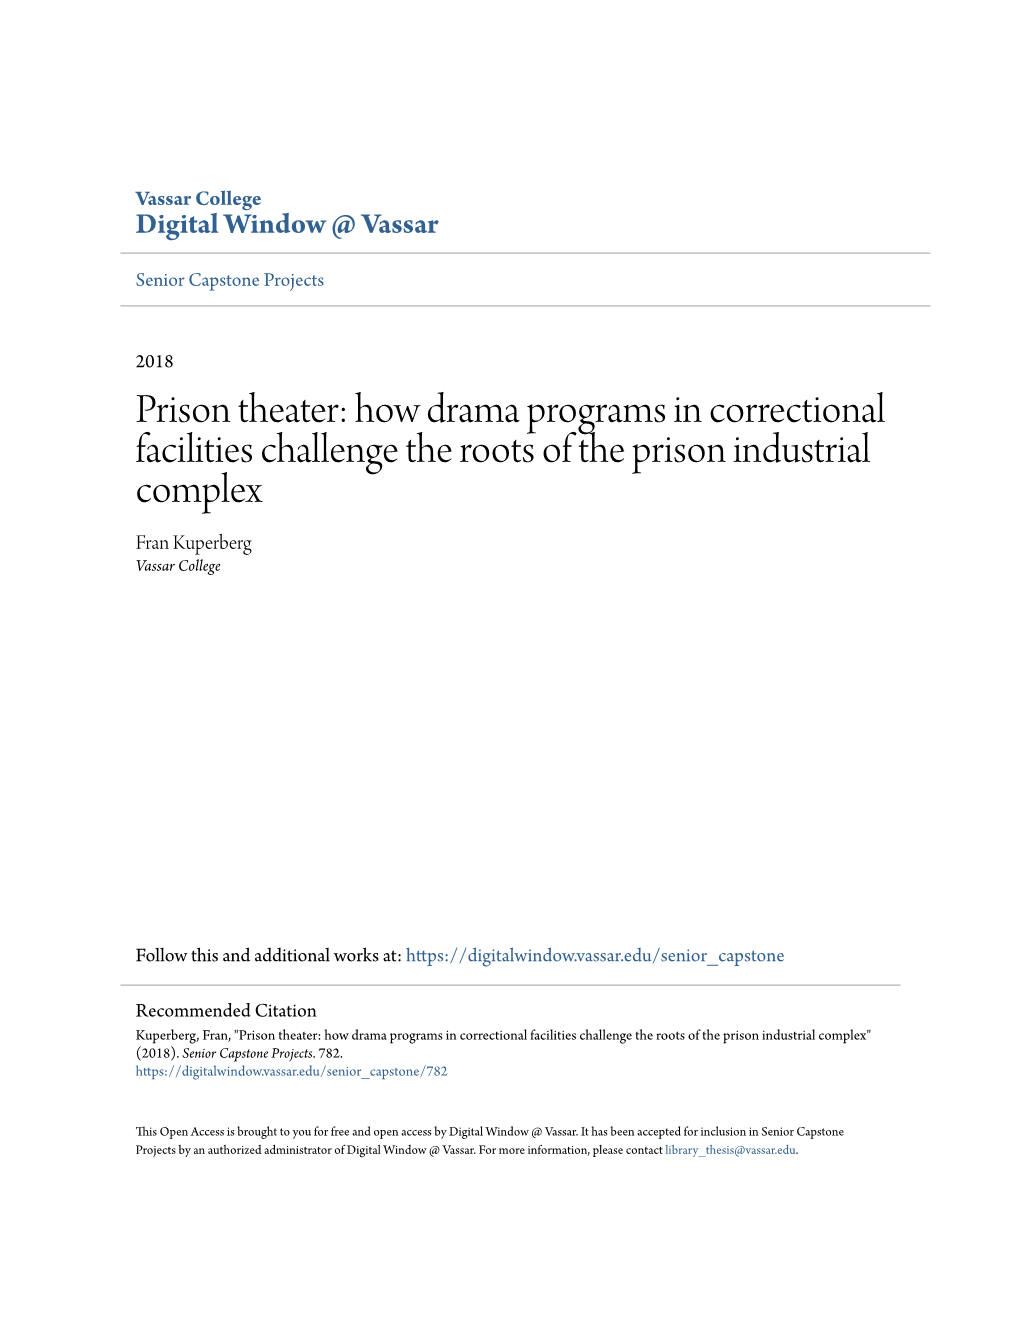 Prison Theater: How Drama Programs in Correctional Facilities Challenge the Roots of the Prison Industrial Complex Fran Kuperberg Vassar College